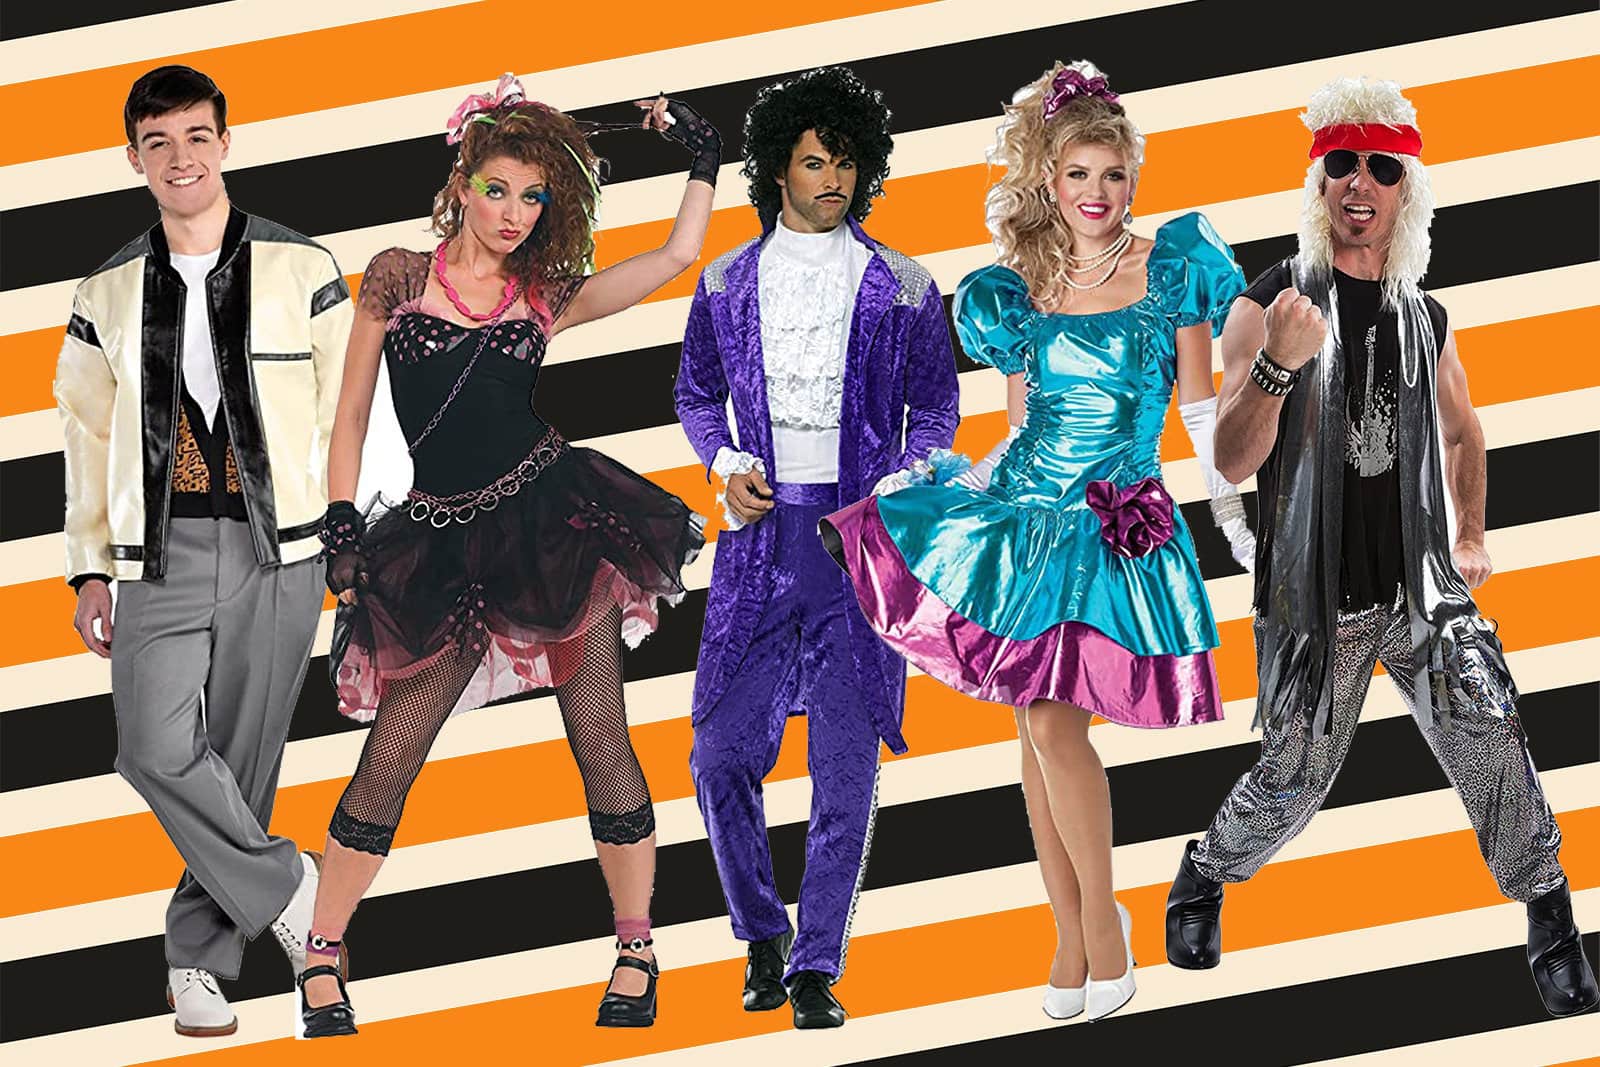 Best 80s Outfits to Wear at a Halloween or Theme Party